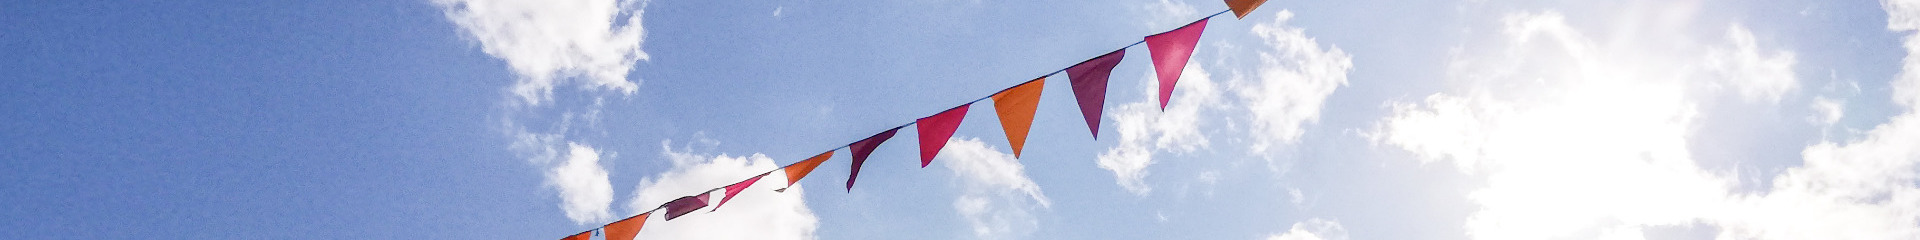 Bunting in the sky